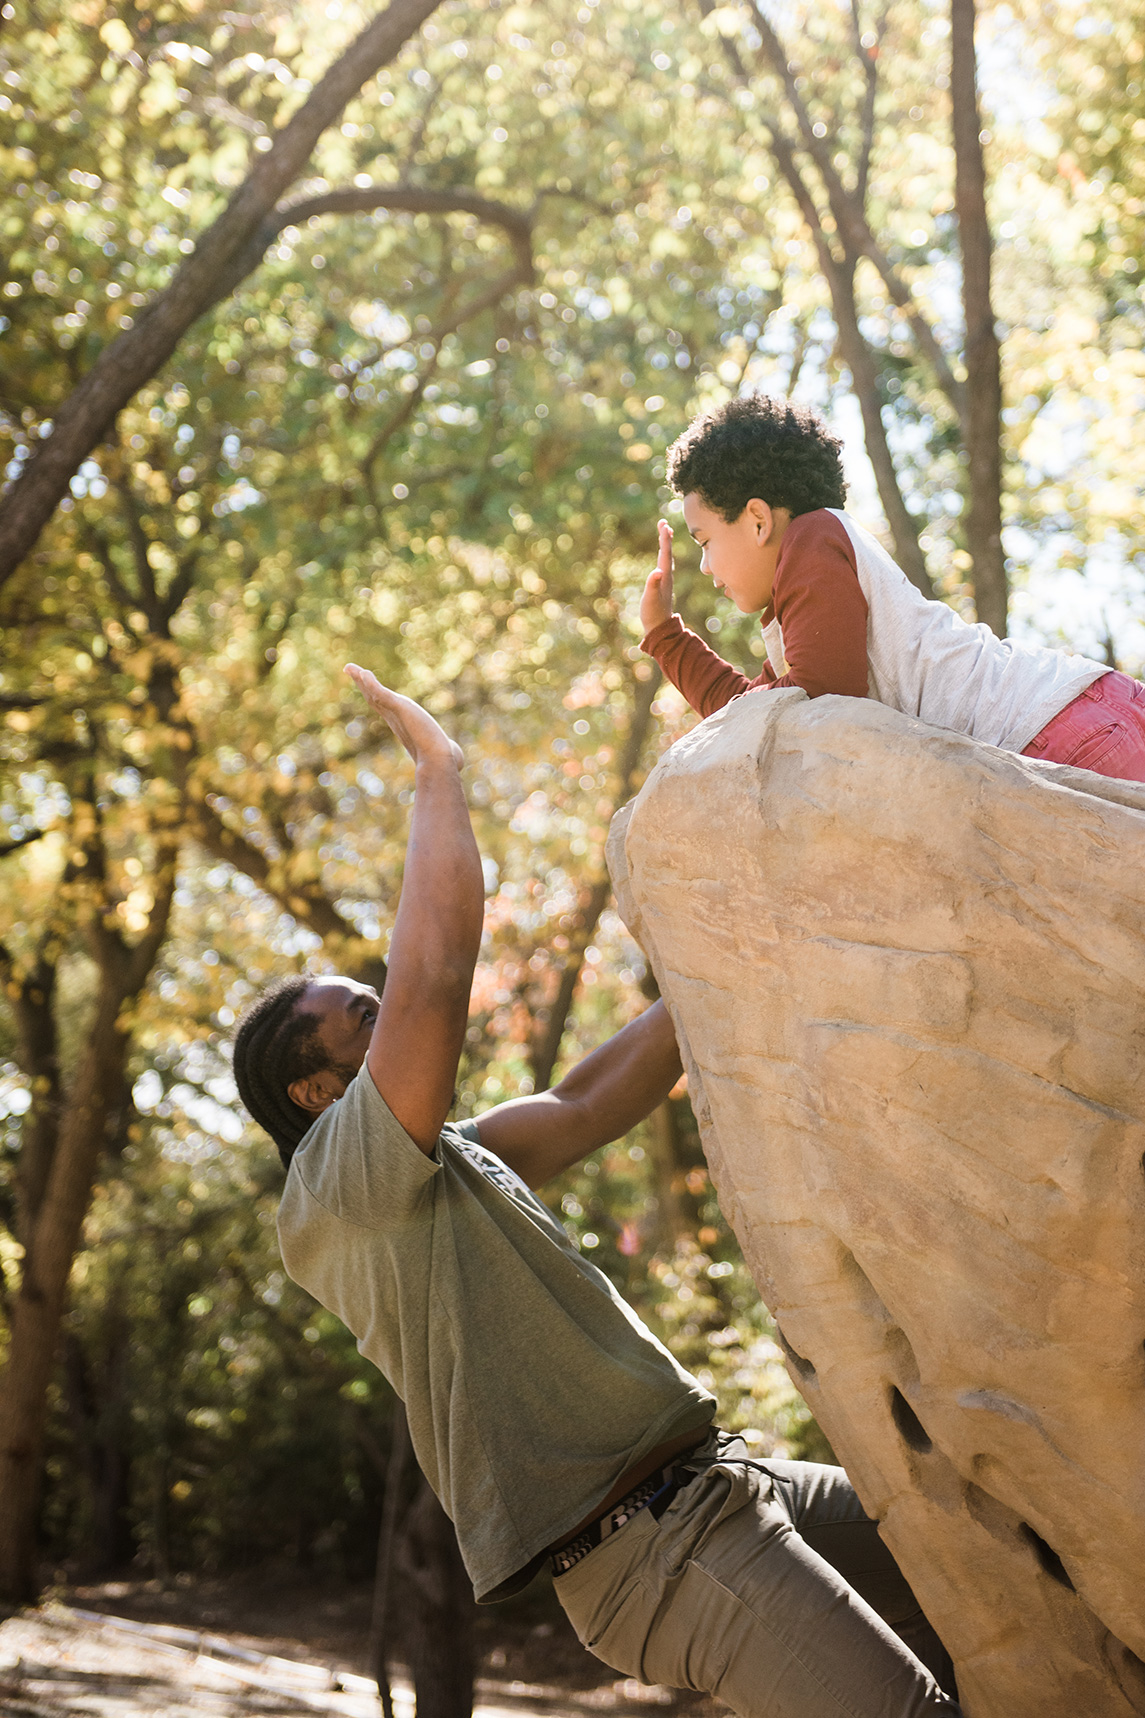 A father and son playing on a rock in a park.